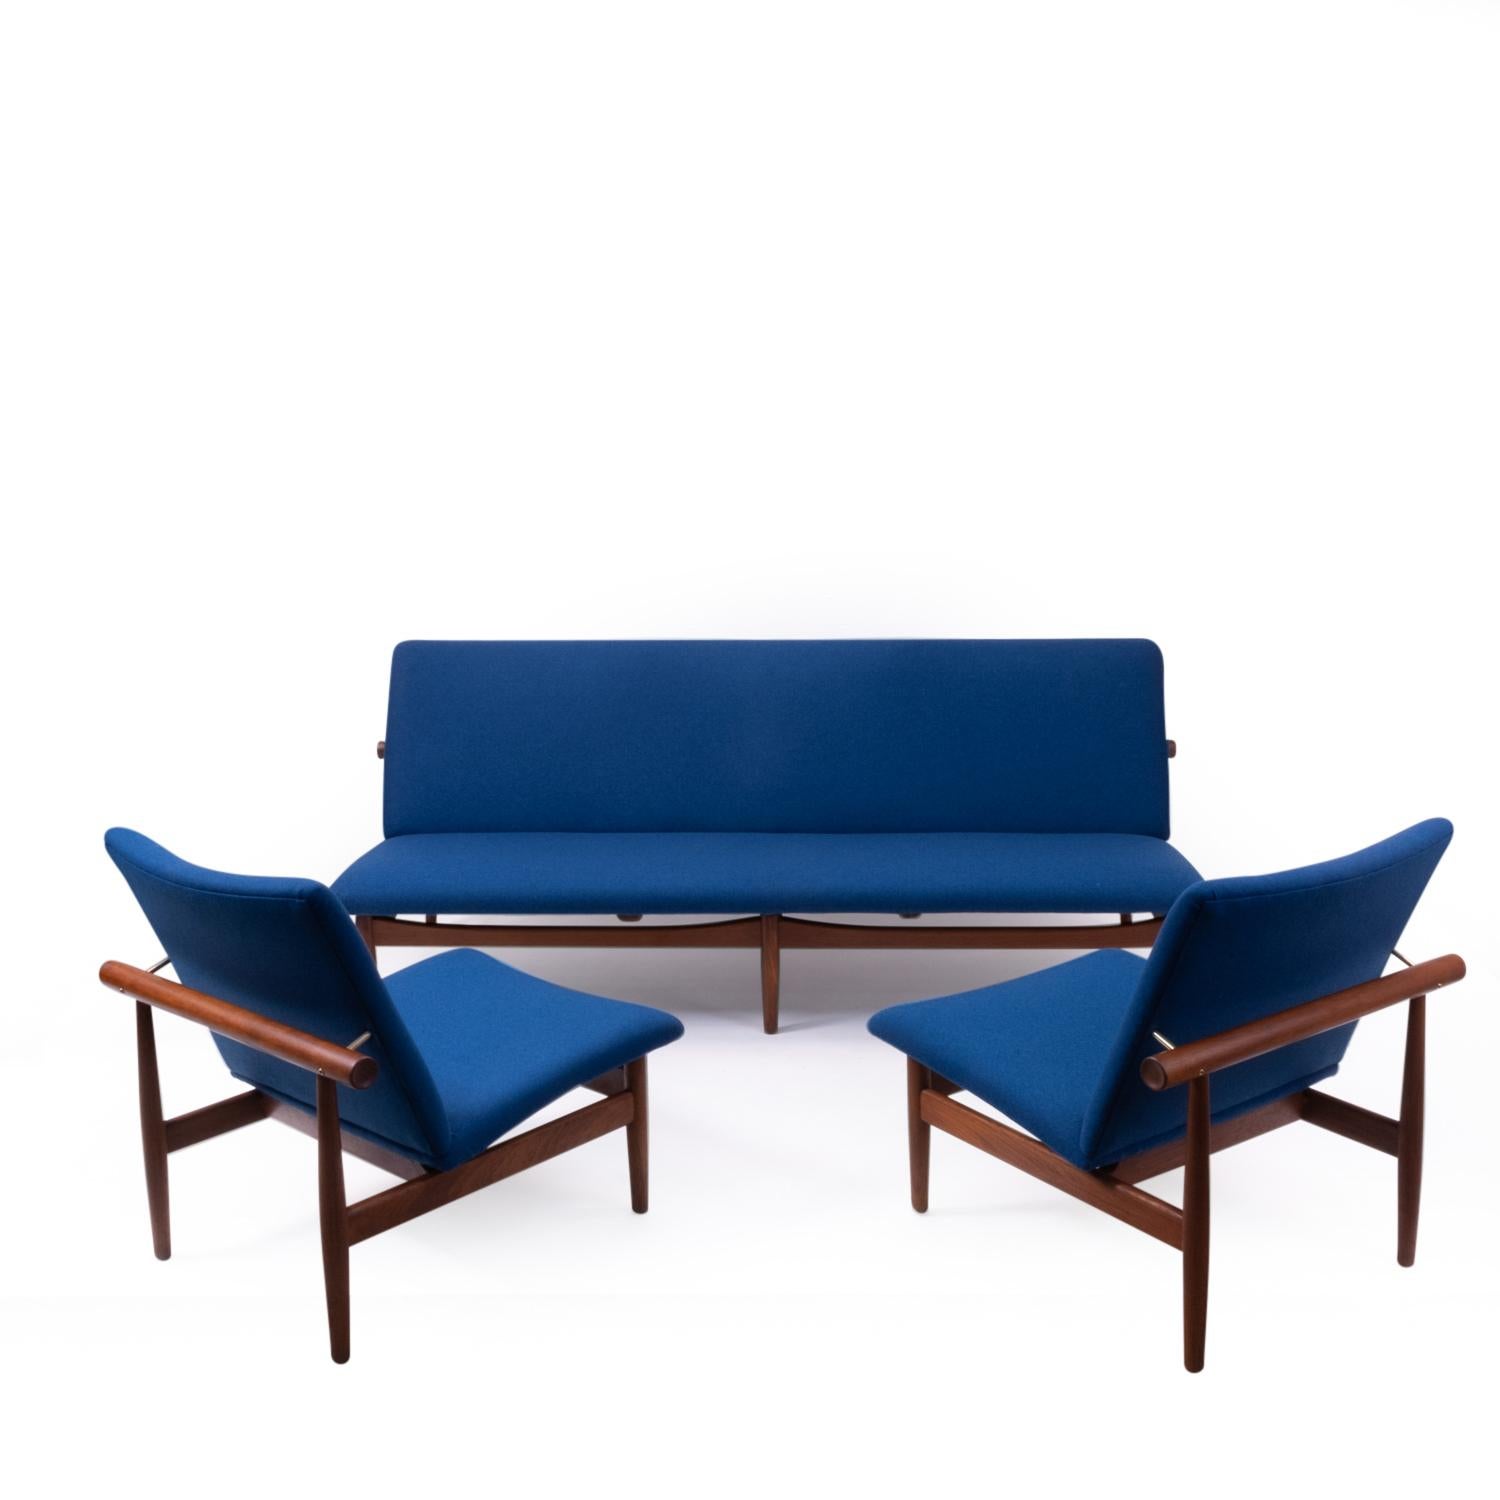 Finn Juhl’s Japan series is one of his most sought after furniture, its design (1953) was based on the Miamjima water gate nearby Hiroshima.

Finn Juhl, a Danish architect born in 1912, started his own practice in 1945 where he specialized in